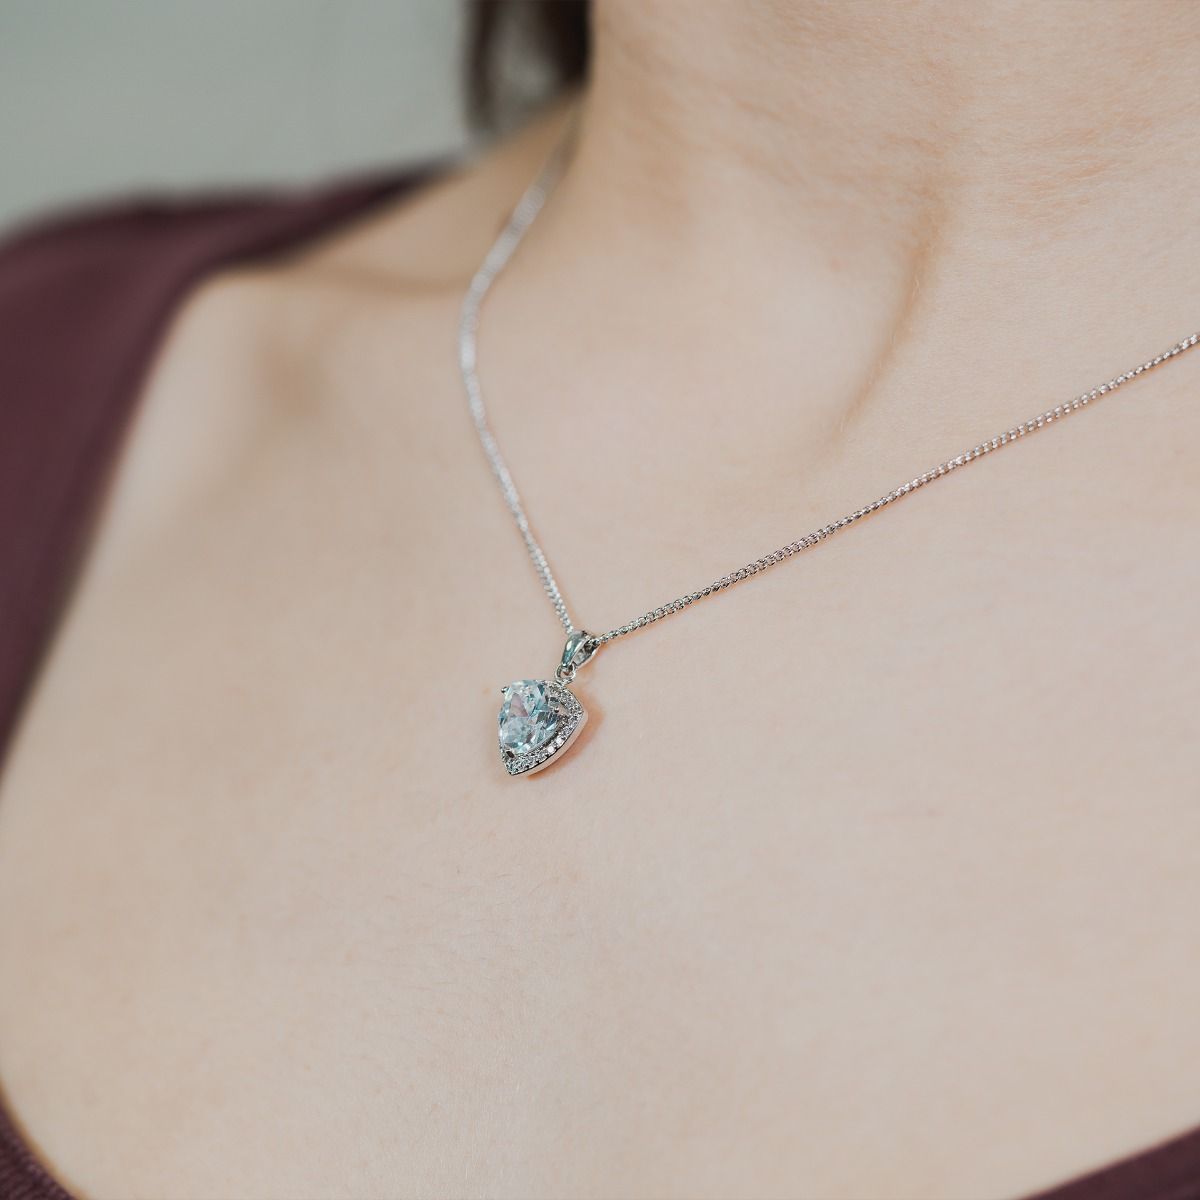 Experience enchantment through our Clear Trillion Halo Pendant. The impressive trillion-cut centre stone emanates a captivating allure. Effortlessly elevate your style with this exquisite piece, infusing timeless glamour into any ensemble.